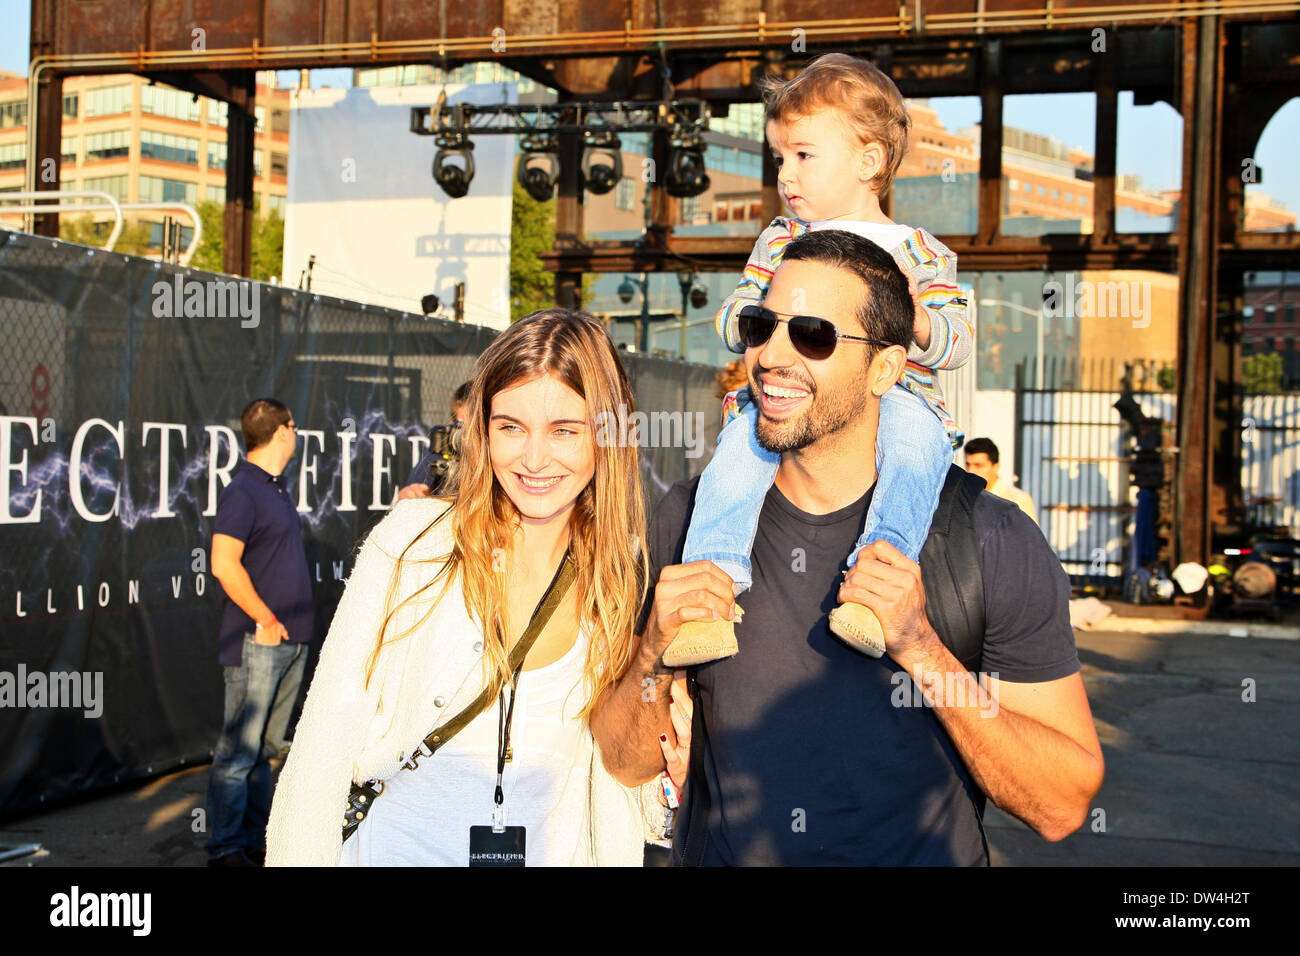 Alizee Guinochet, David Blaine and their daughter Dessa walk around the site of his latest challenge, 'Electrified' which features Blaine attached to a series of Tesla coils for 72 hours straight, without breaks for sleep or food held at Pier 54, Manhatta Stock Photo